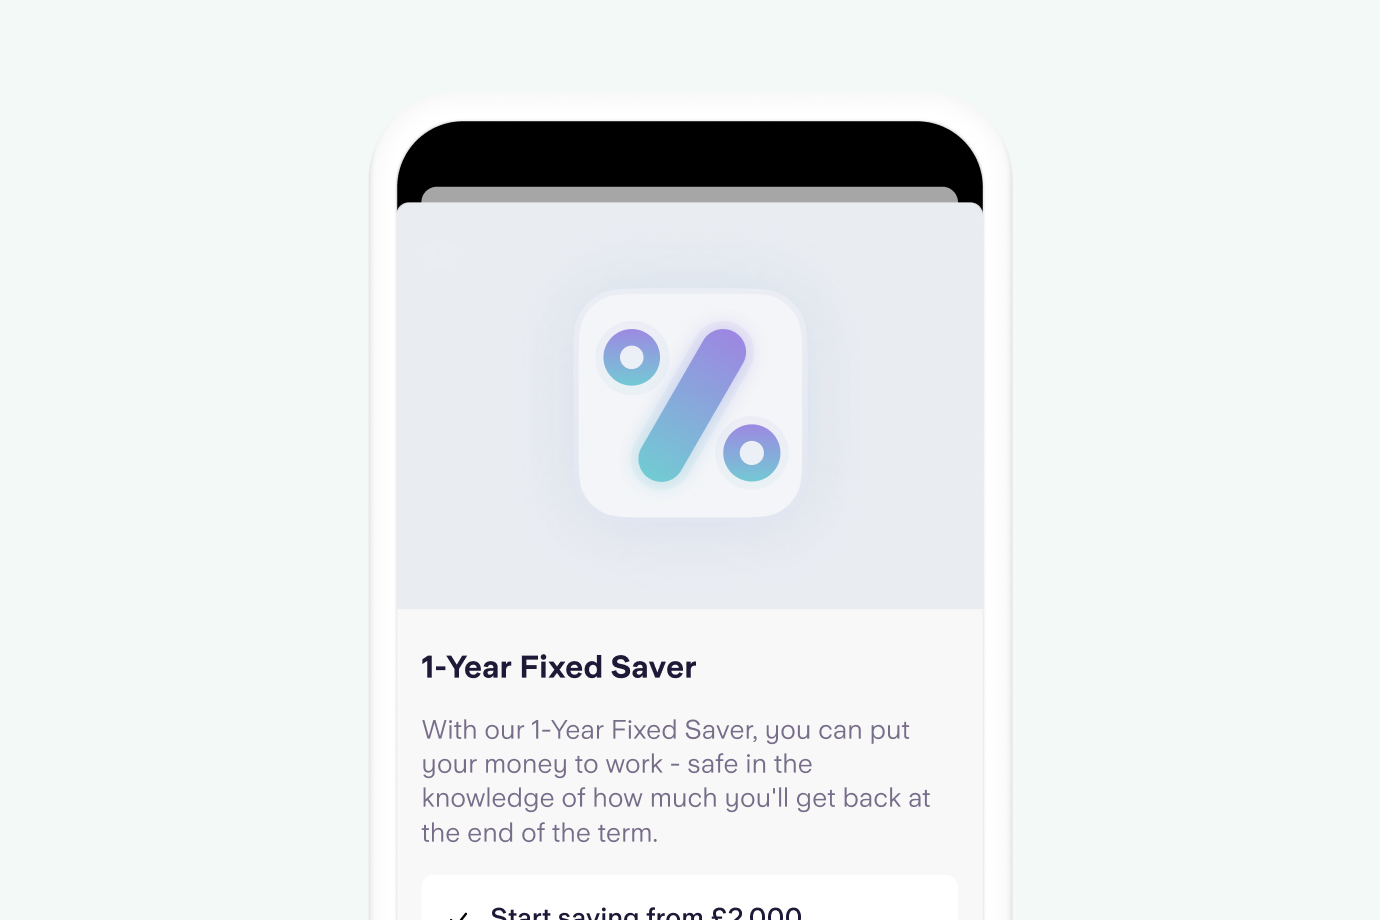 Screenshot of the Starling Bank app's fixed saver page